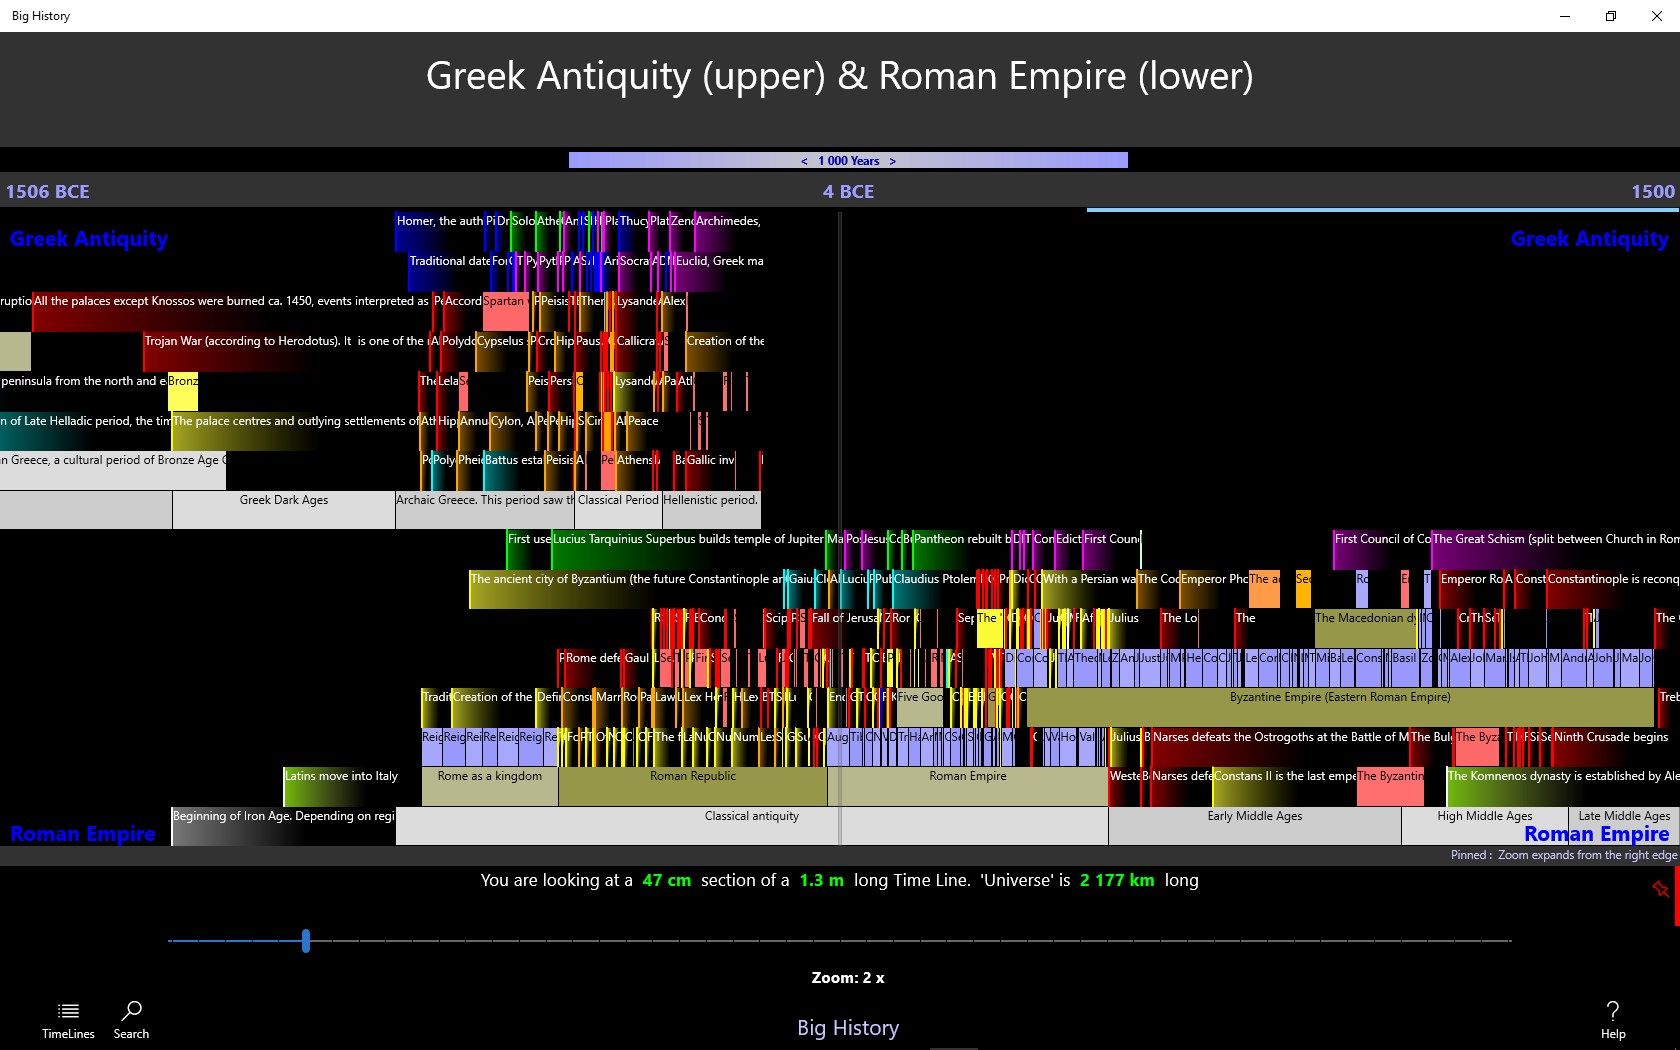 Greek antiquity and roman empire compared